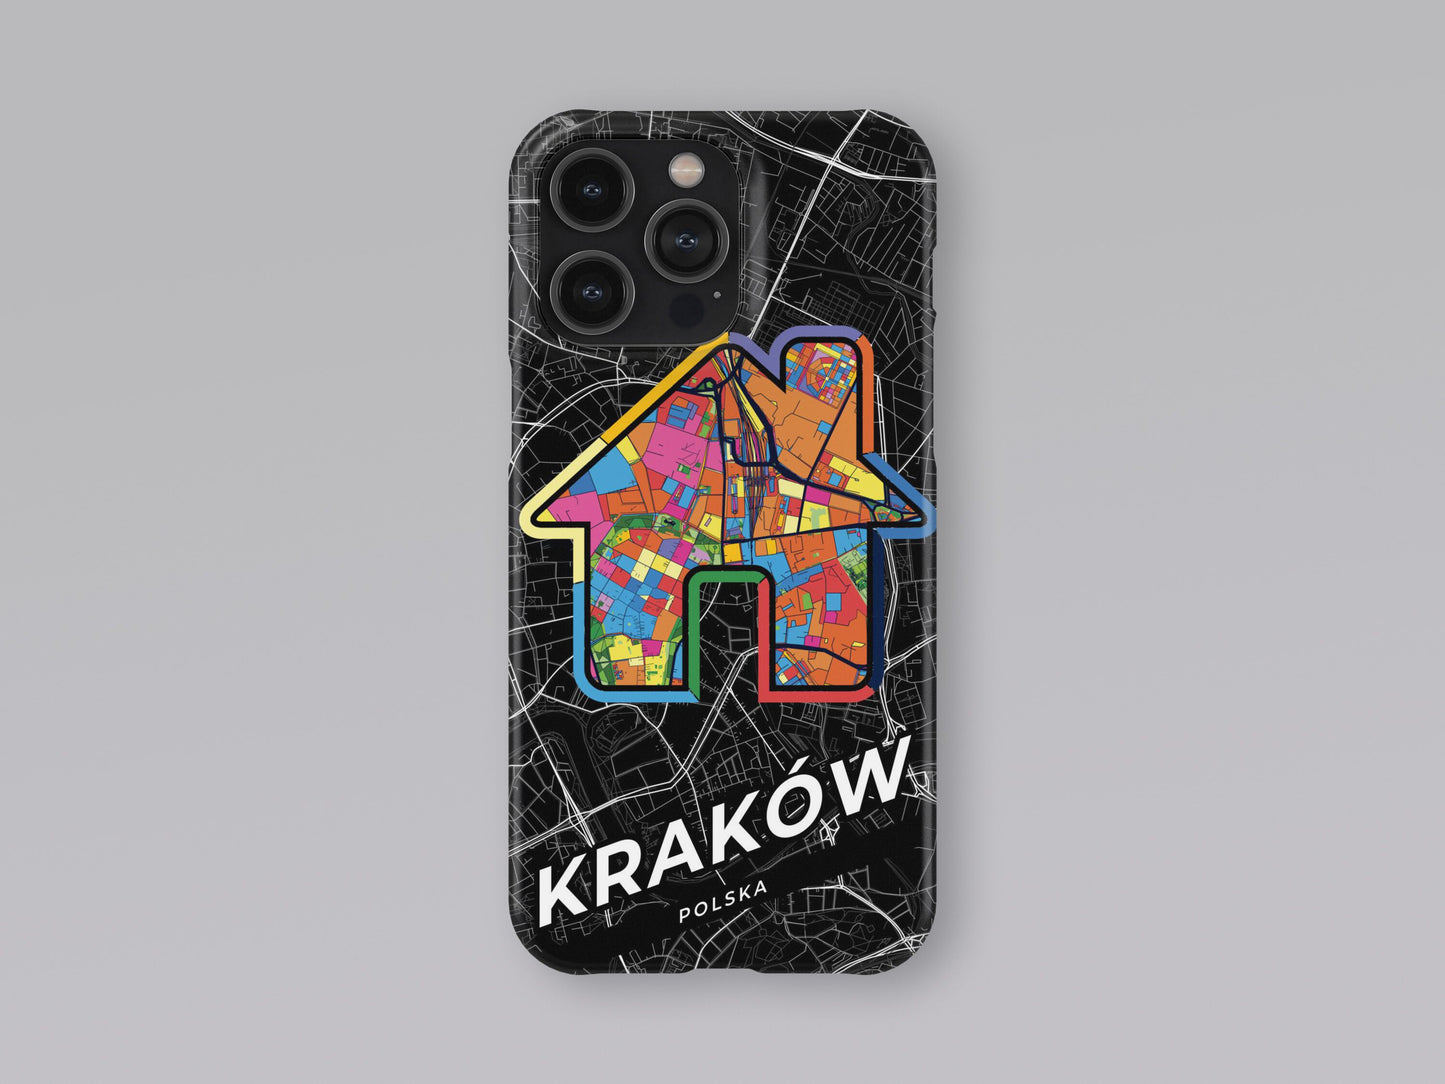 Kraków Poland slim phone case with colorful icon. Birthday, wedding or housewarming gift. Couple match cases. 3